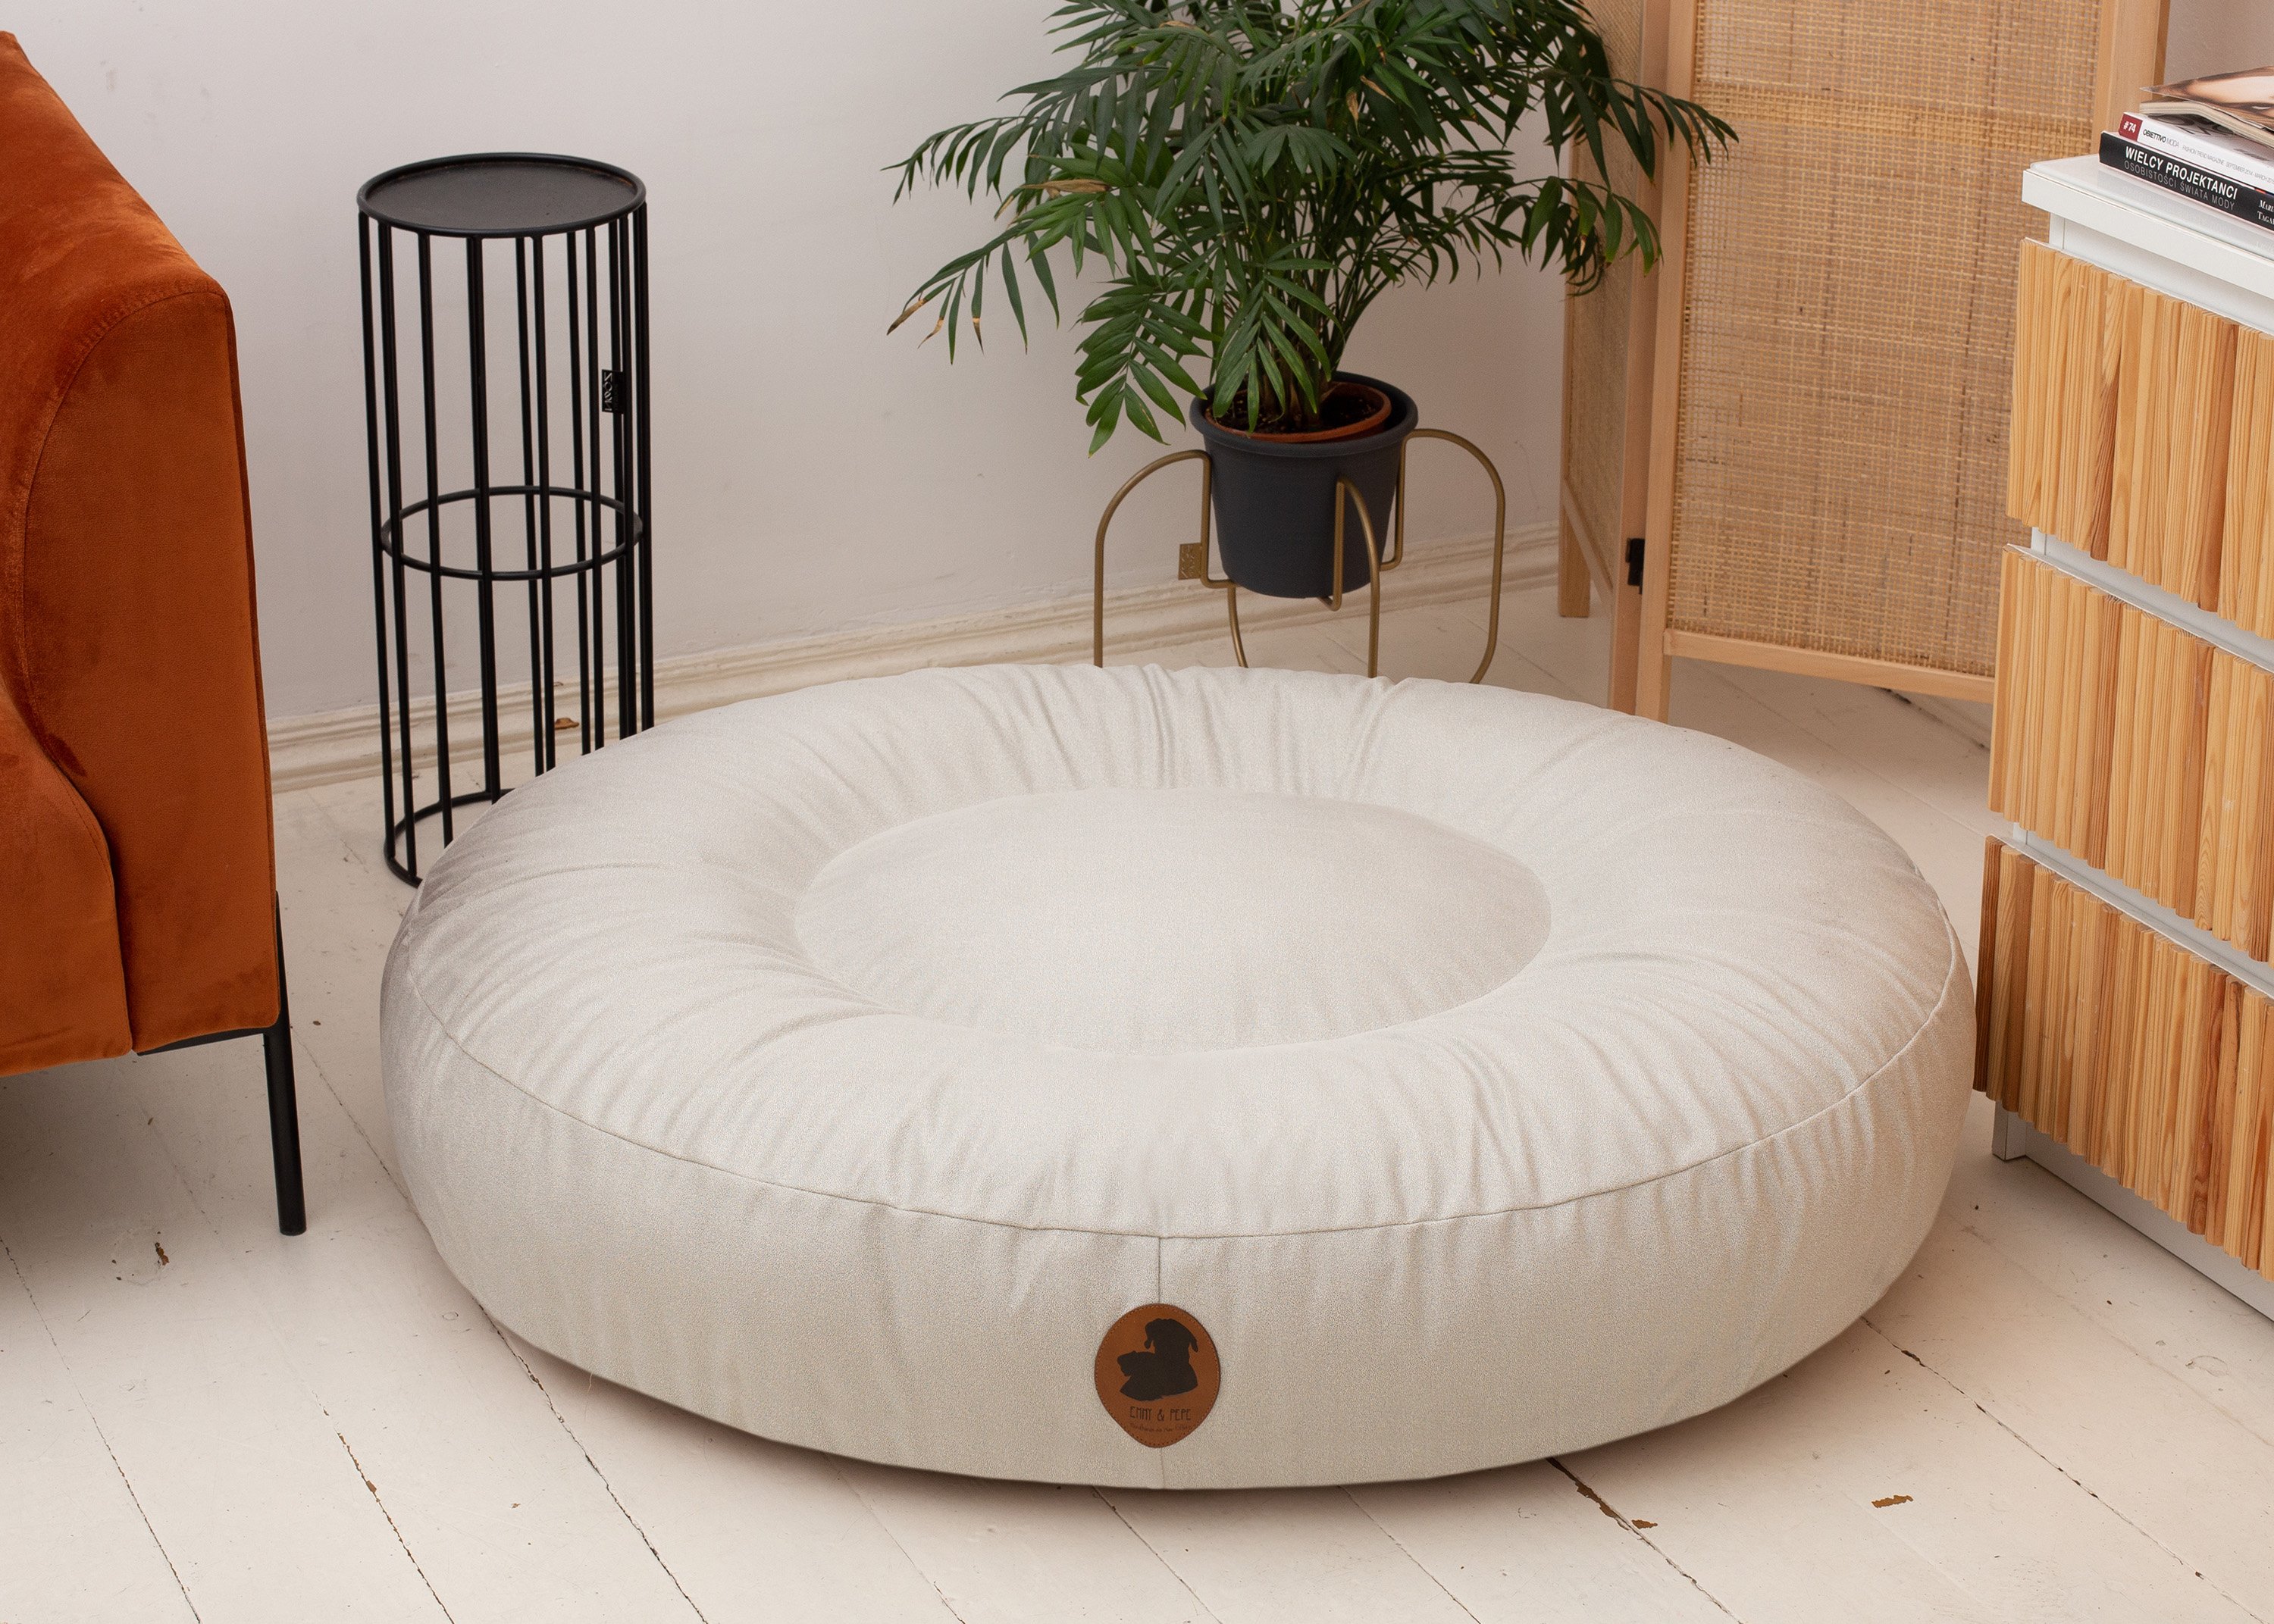 Changeable cover Pets Friendly Creme Oval-M (100x80cm))